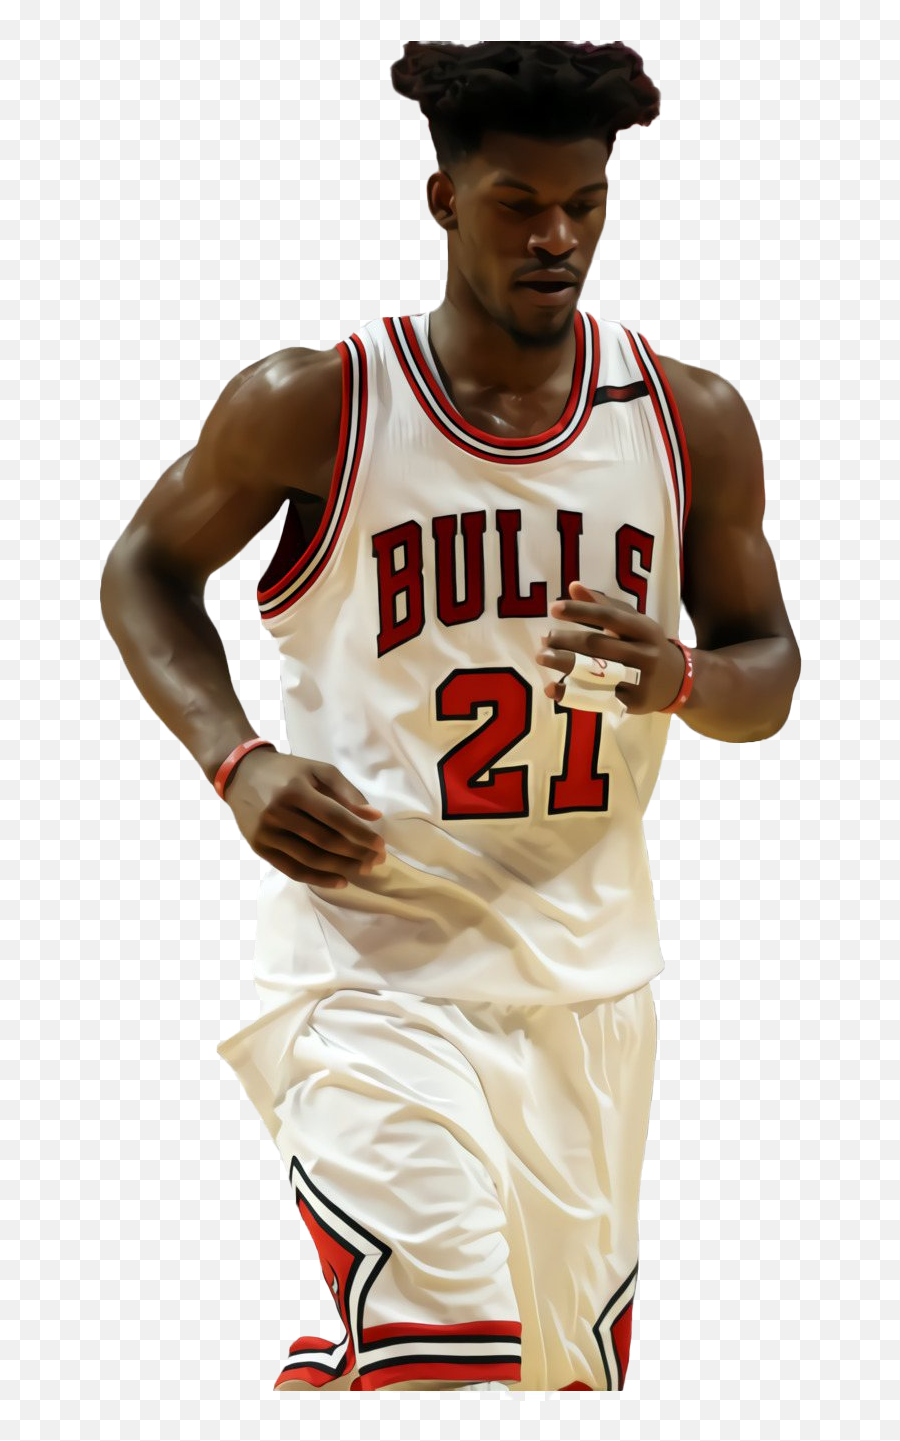 Jimmy Butler Download Png Image - Jimmy Butler With Bulls,Jimmy Butler Png